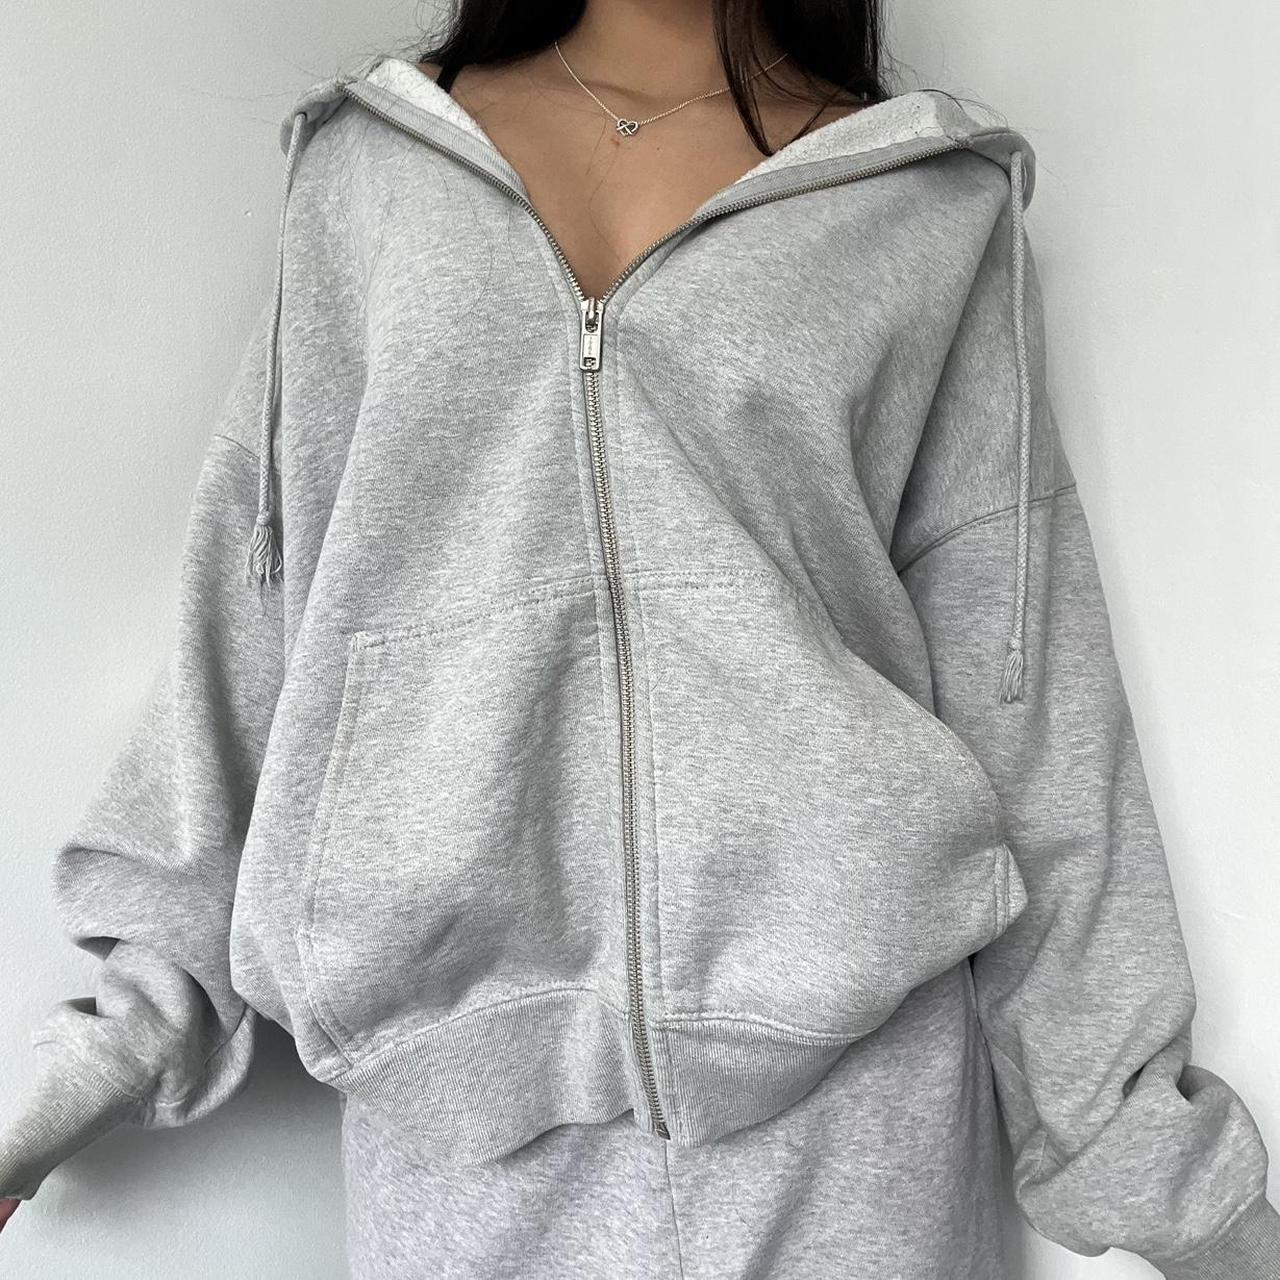 Dupe for Brandy Melville Christy Hoodie? : r/findfashion